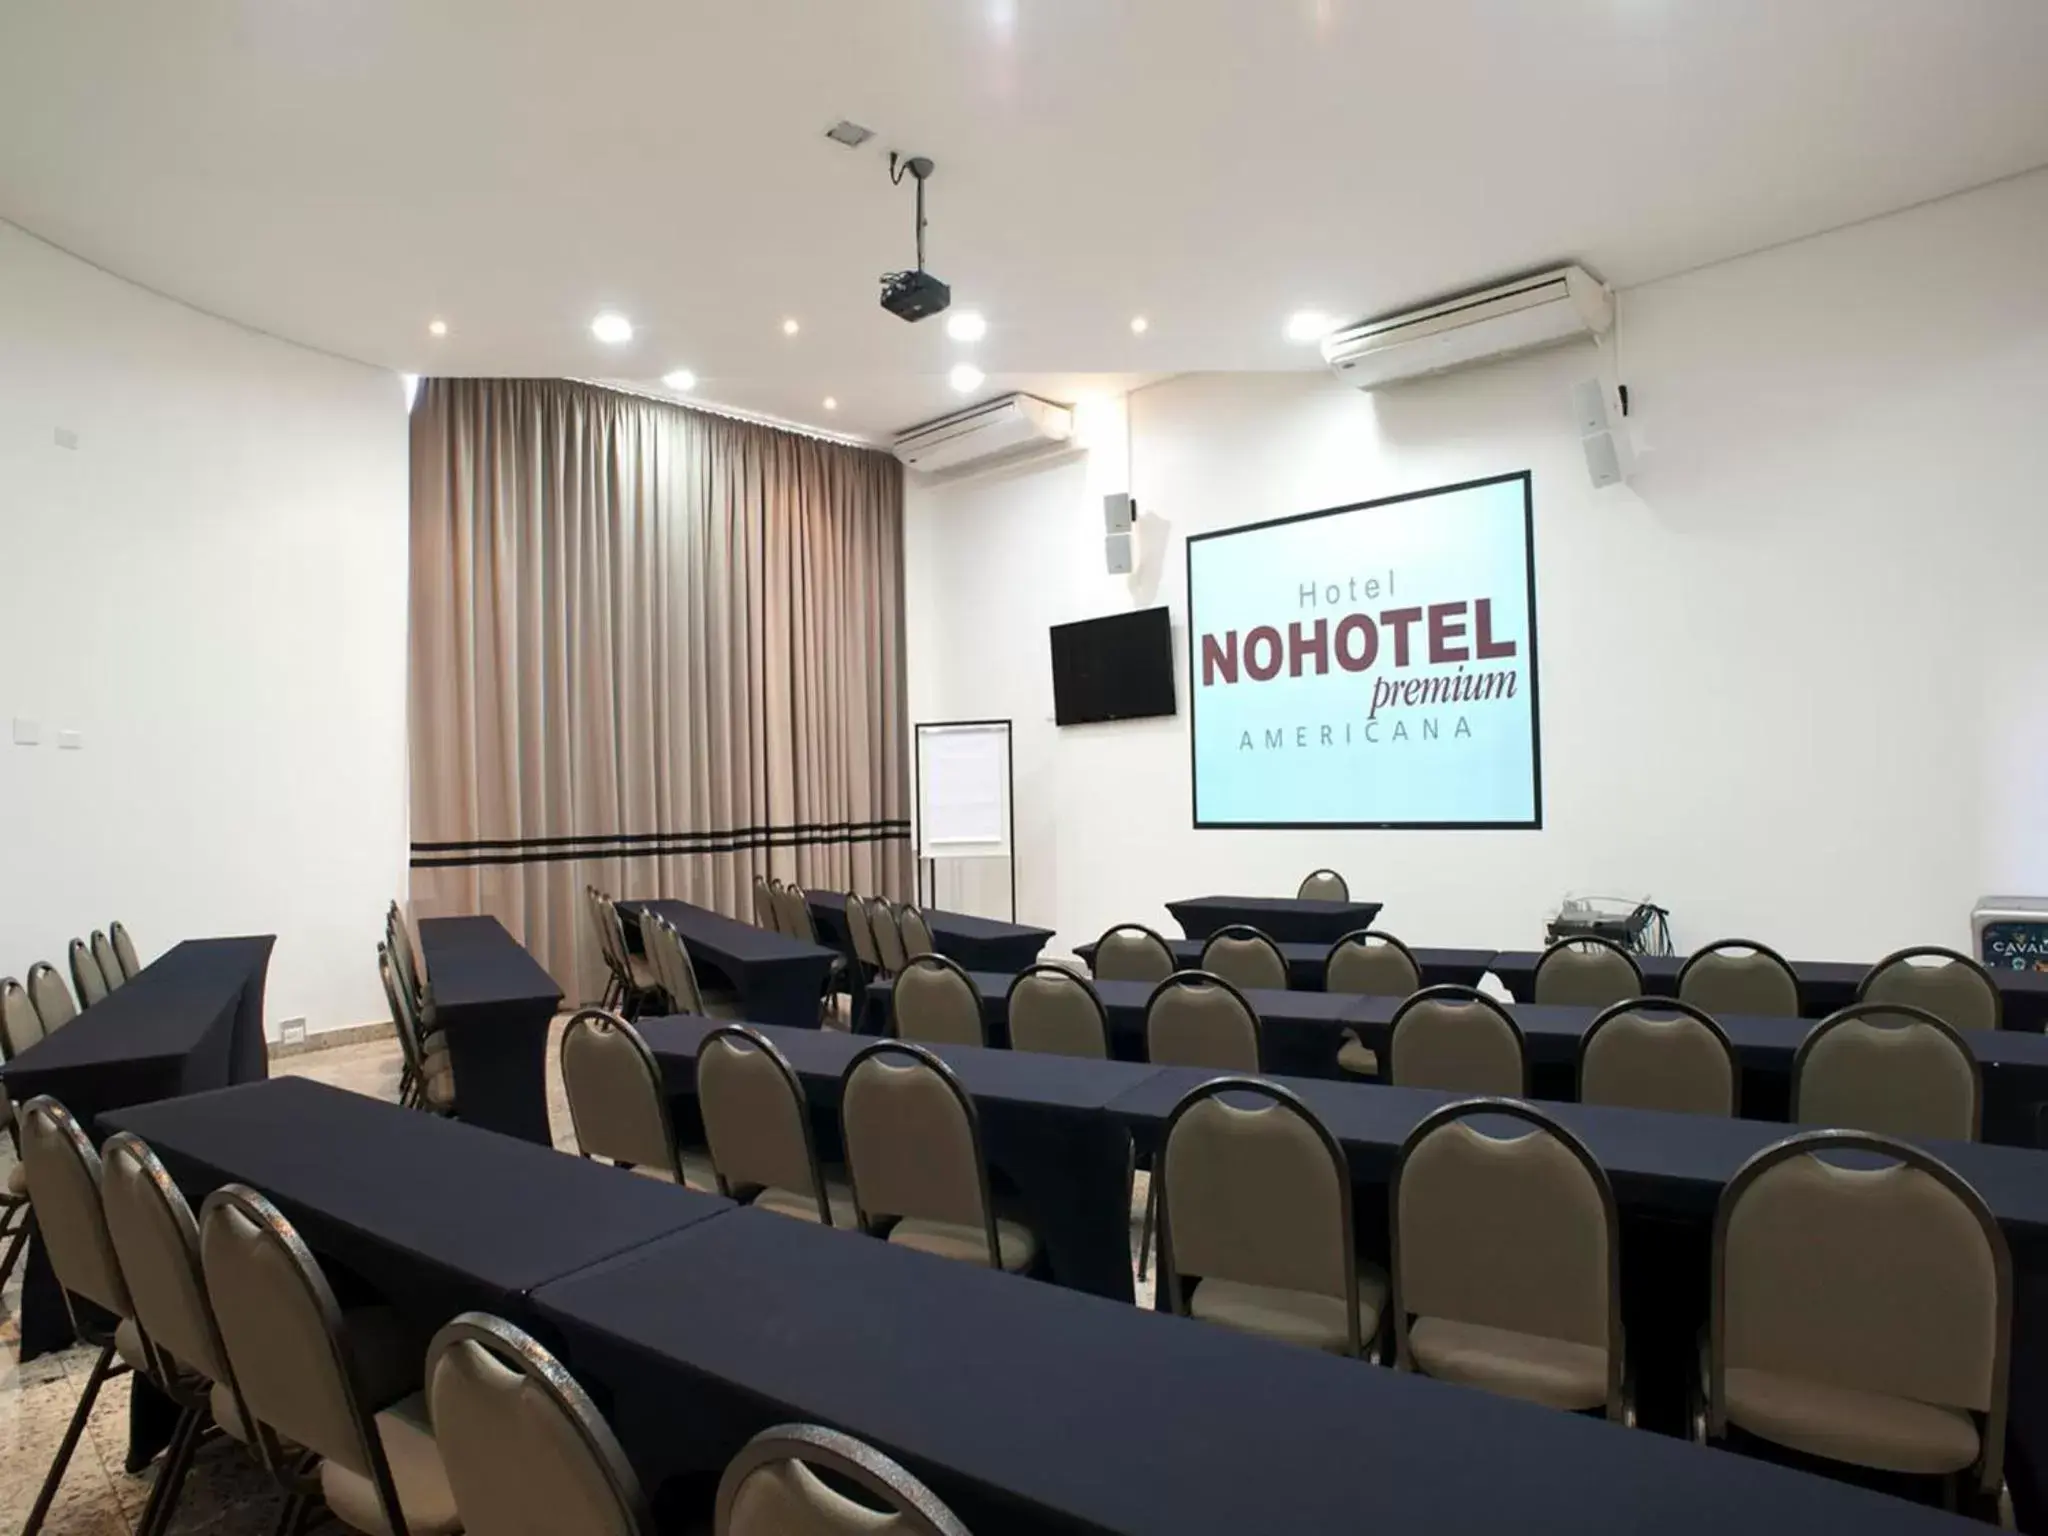 Meeting/conference room in Nohotel Premium Americana